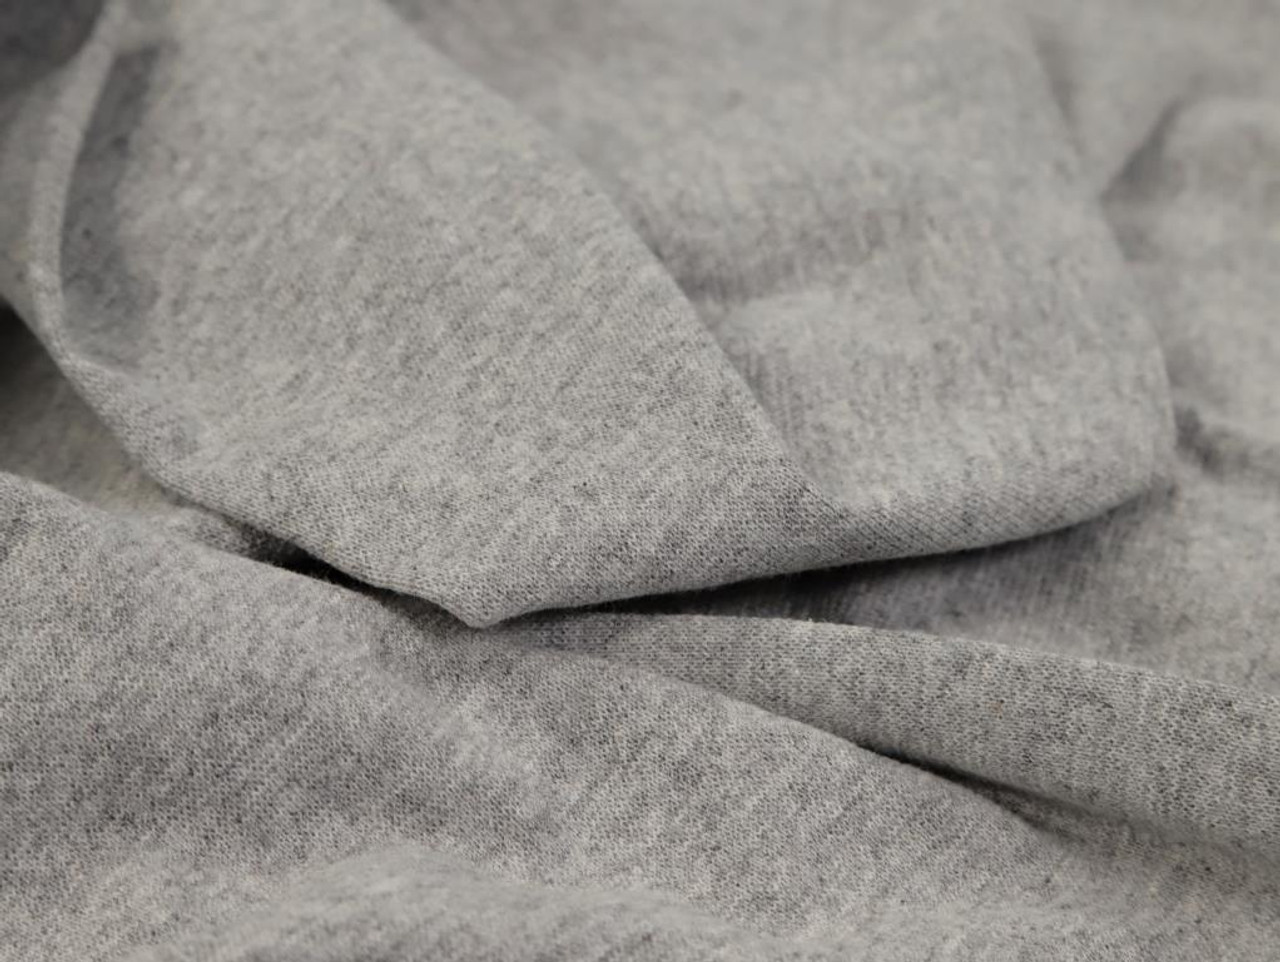 Cotton & Polyester Jersey Fabric - Silver & Grey Marl